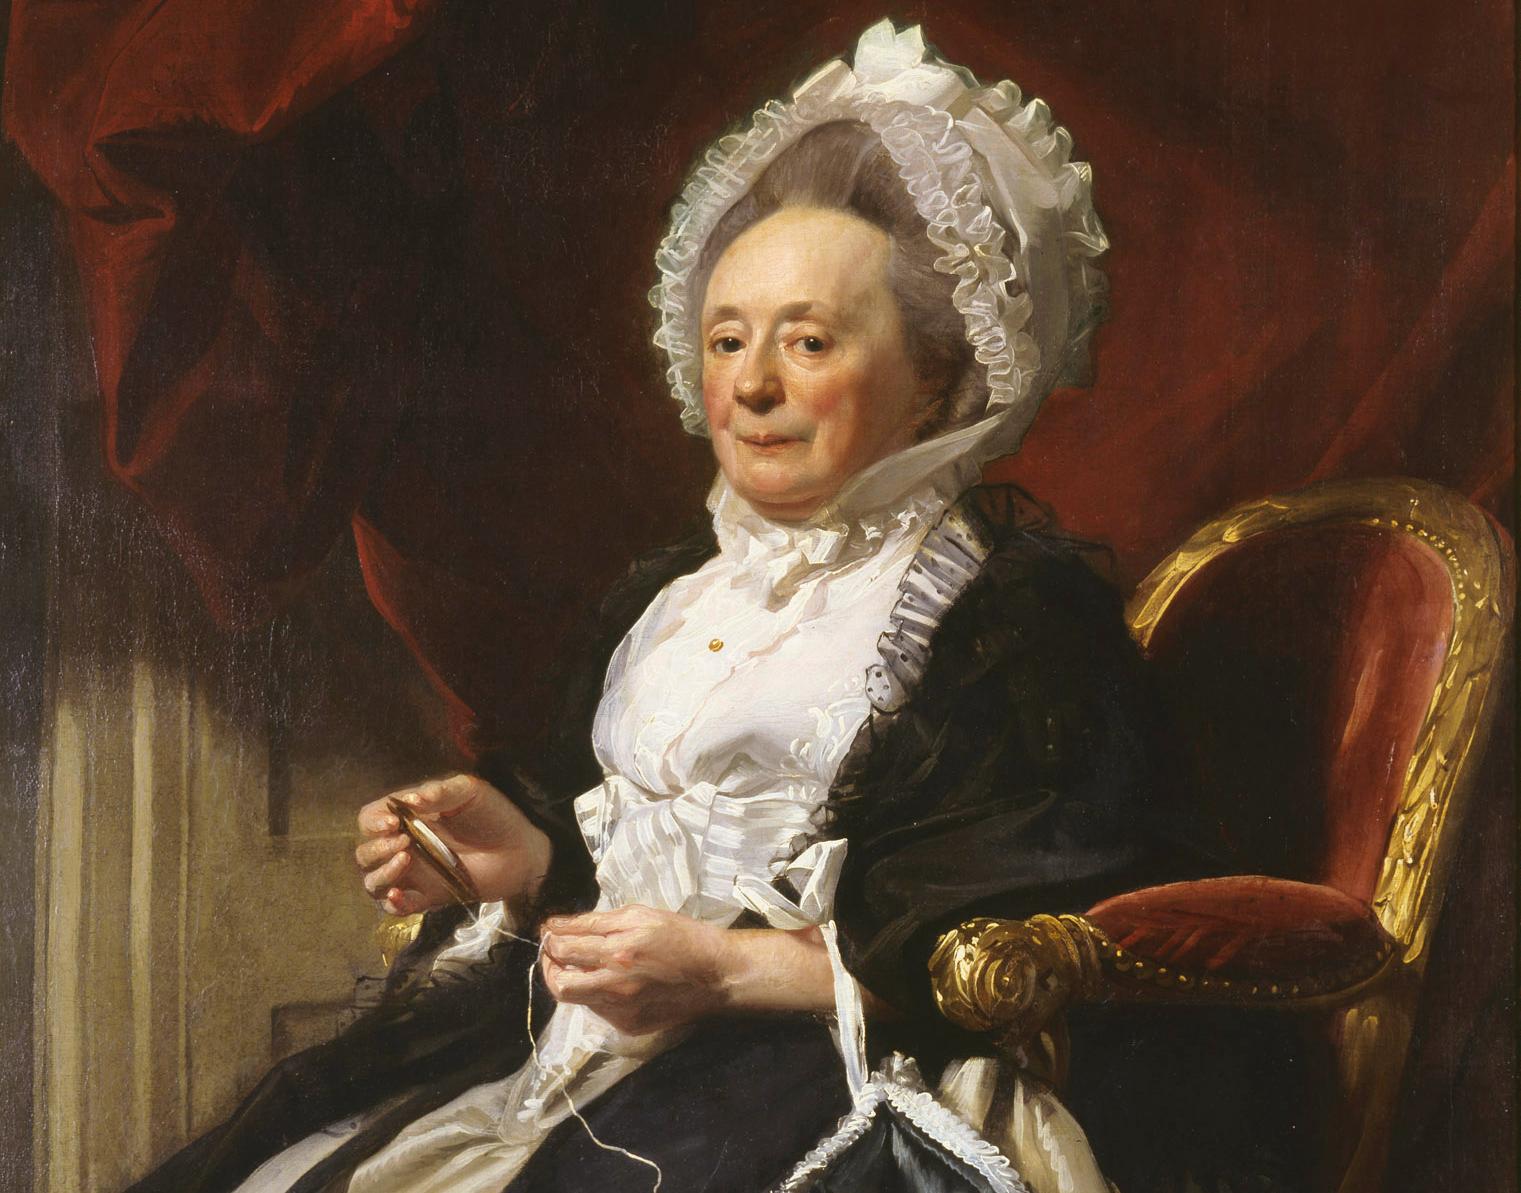 American Portraits at the Wadsworth Atheneum 